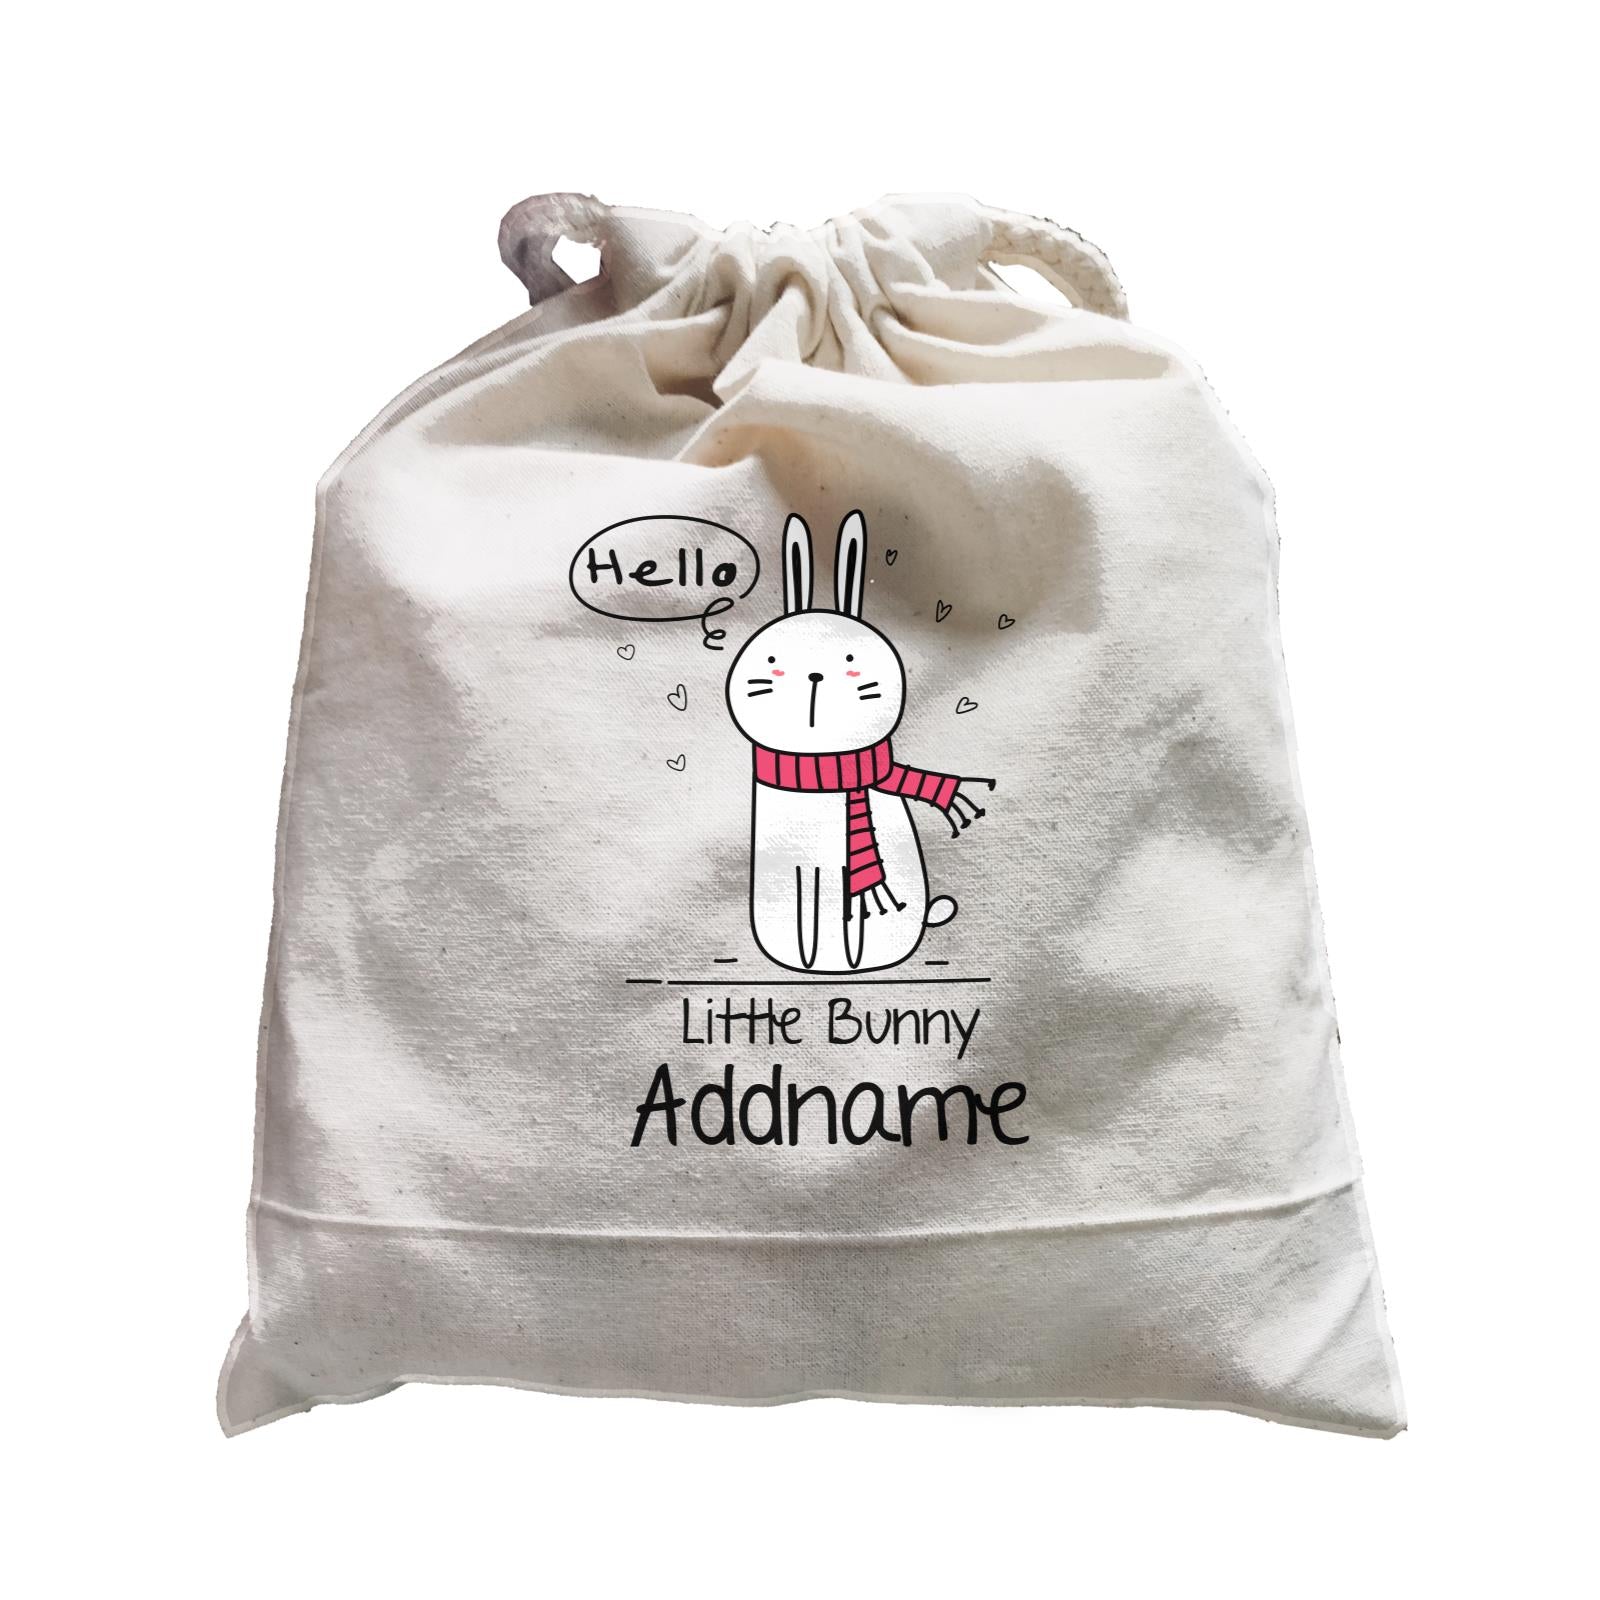 Cute Animals And Friends Series Hello Little Bunny Addname Satchel